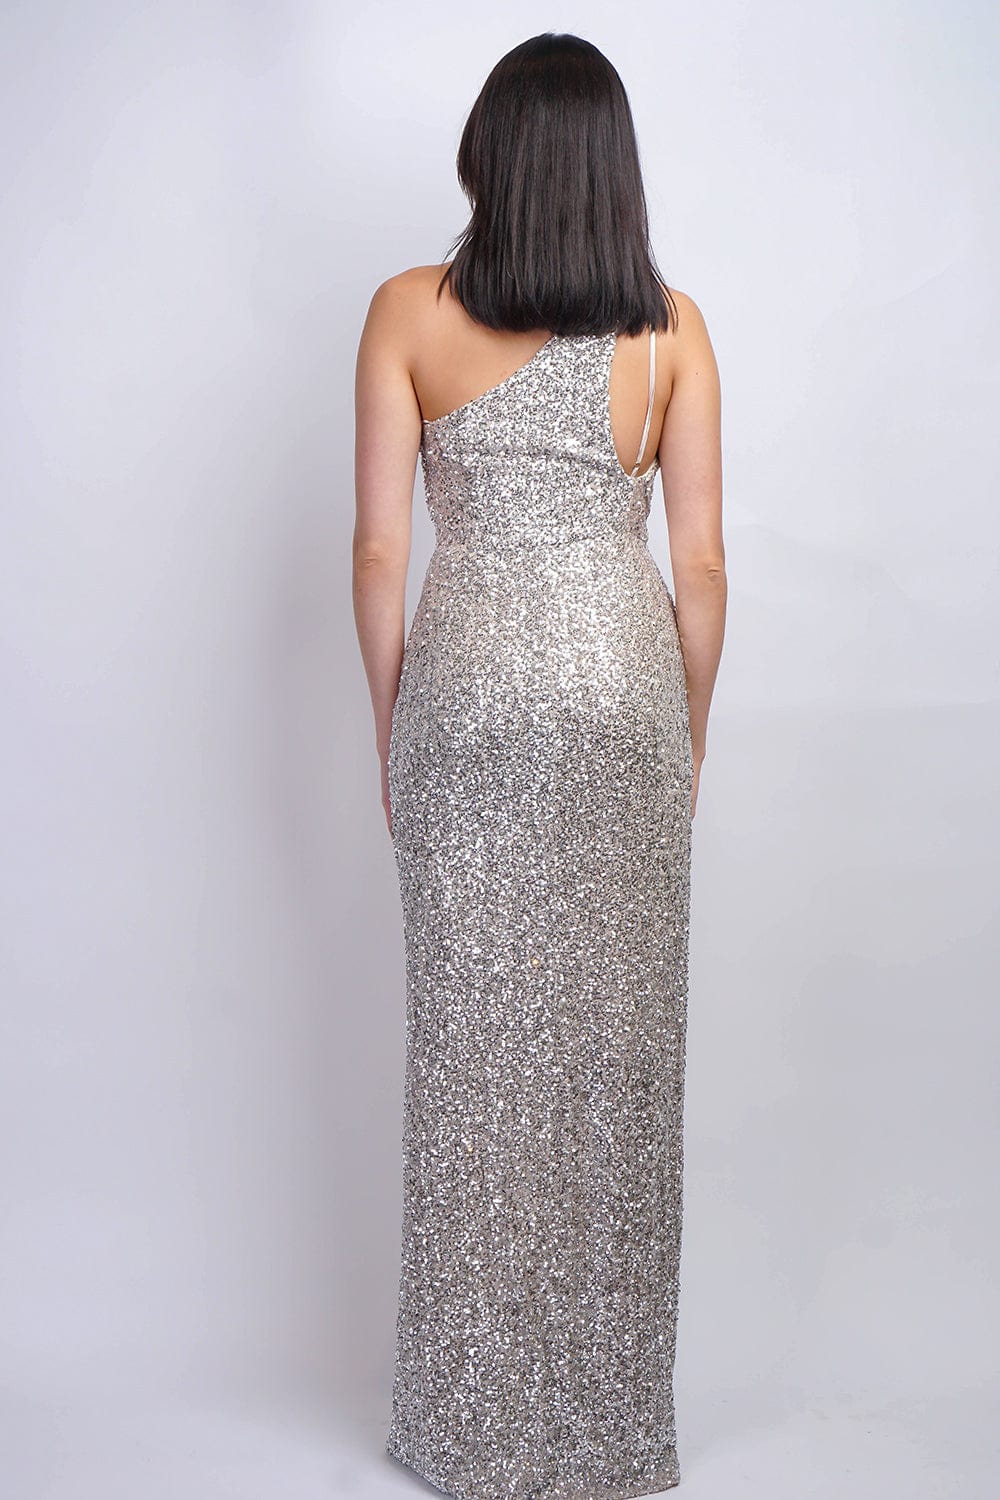 GOWNS Ice Silver Sequins One Shld Cut Out Gown - Chloe Dao